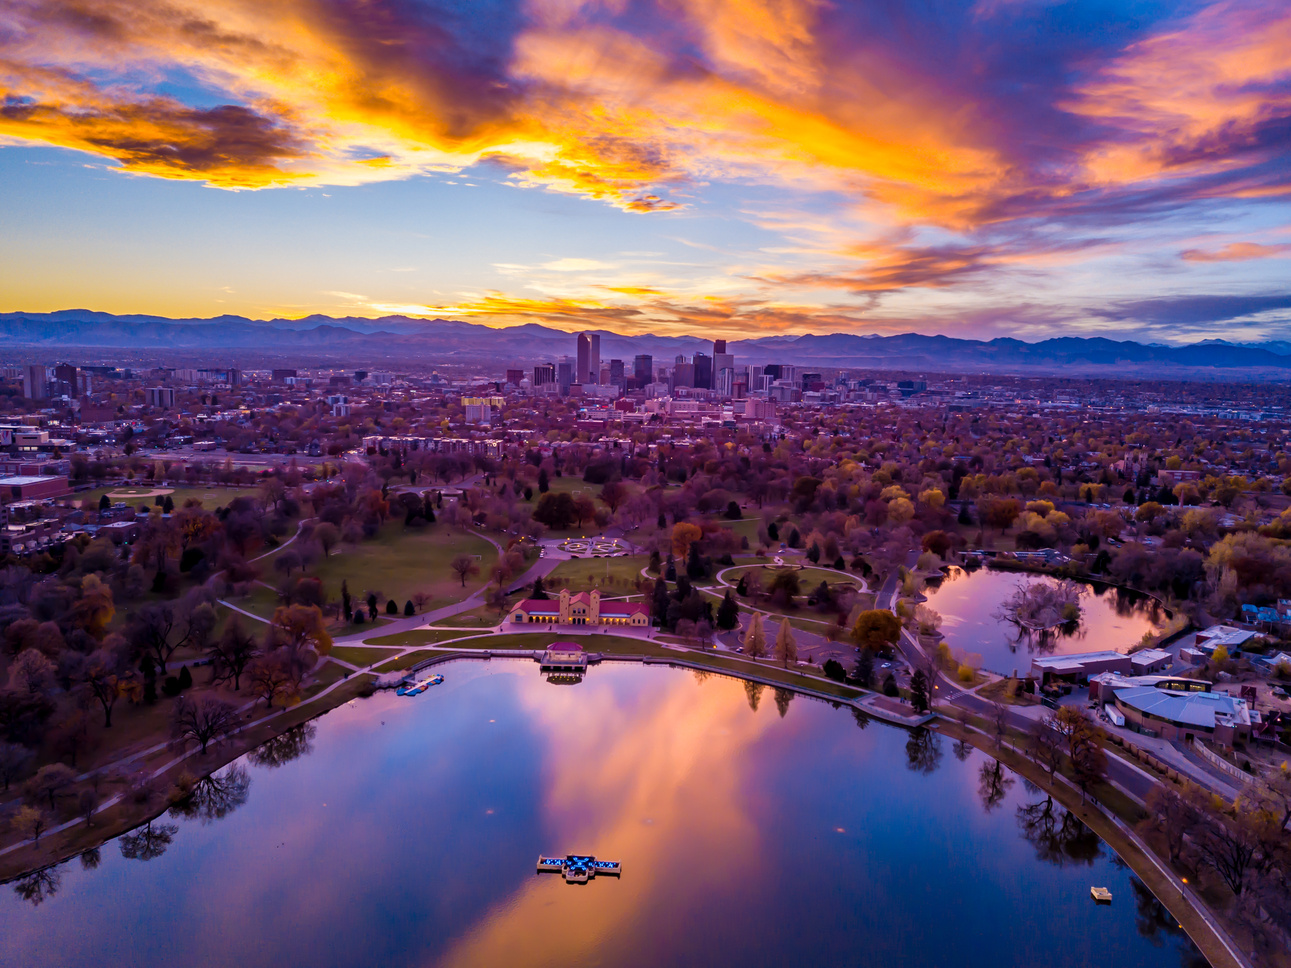 Colorful Drone Sunset Over City Park in Denver, Colorado